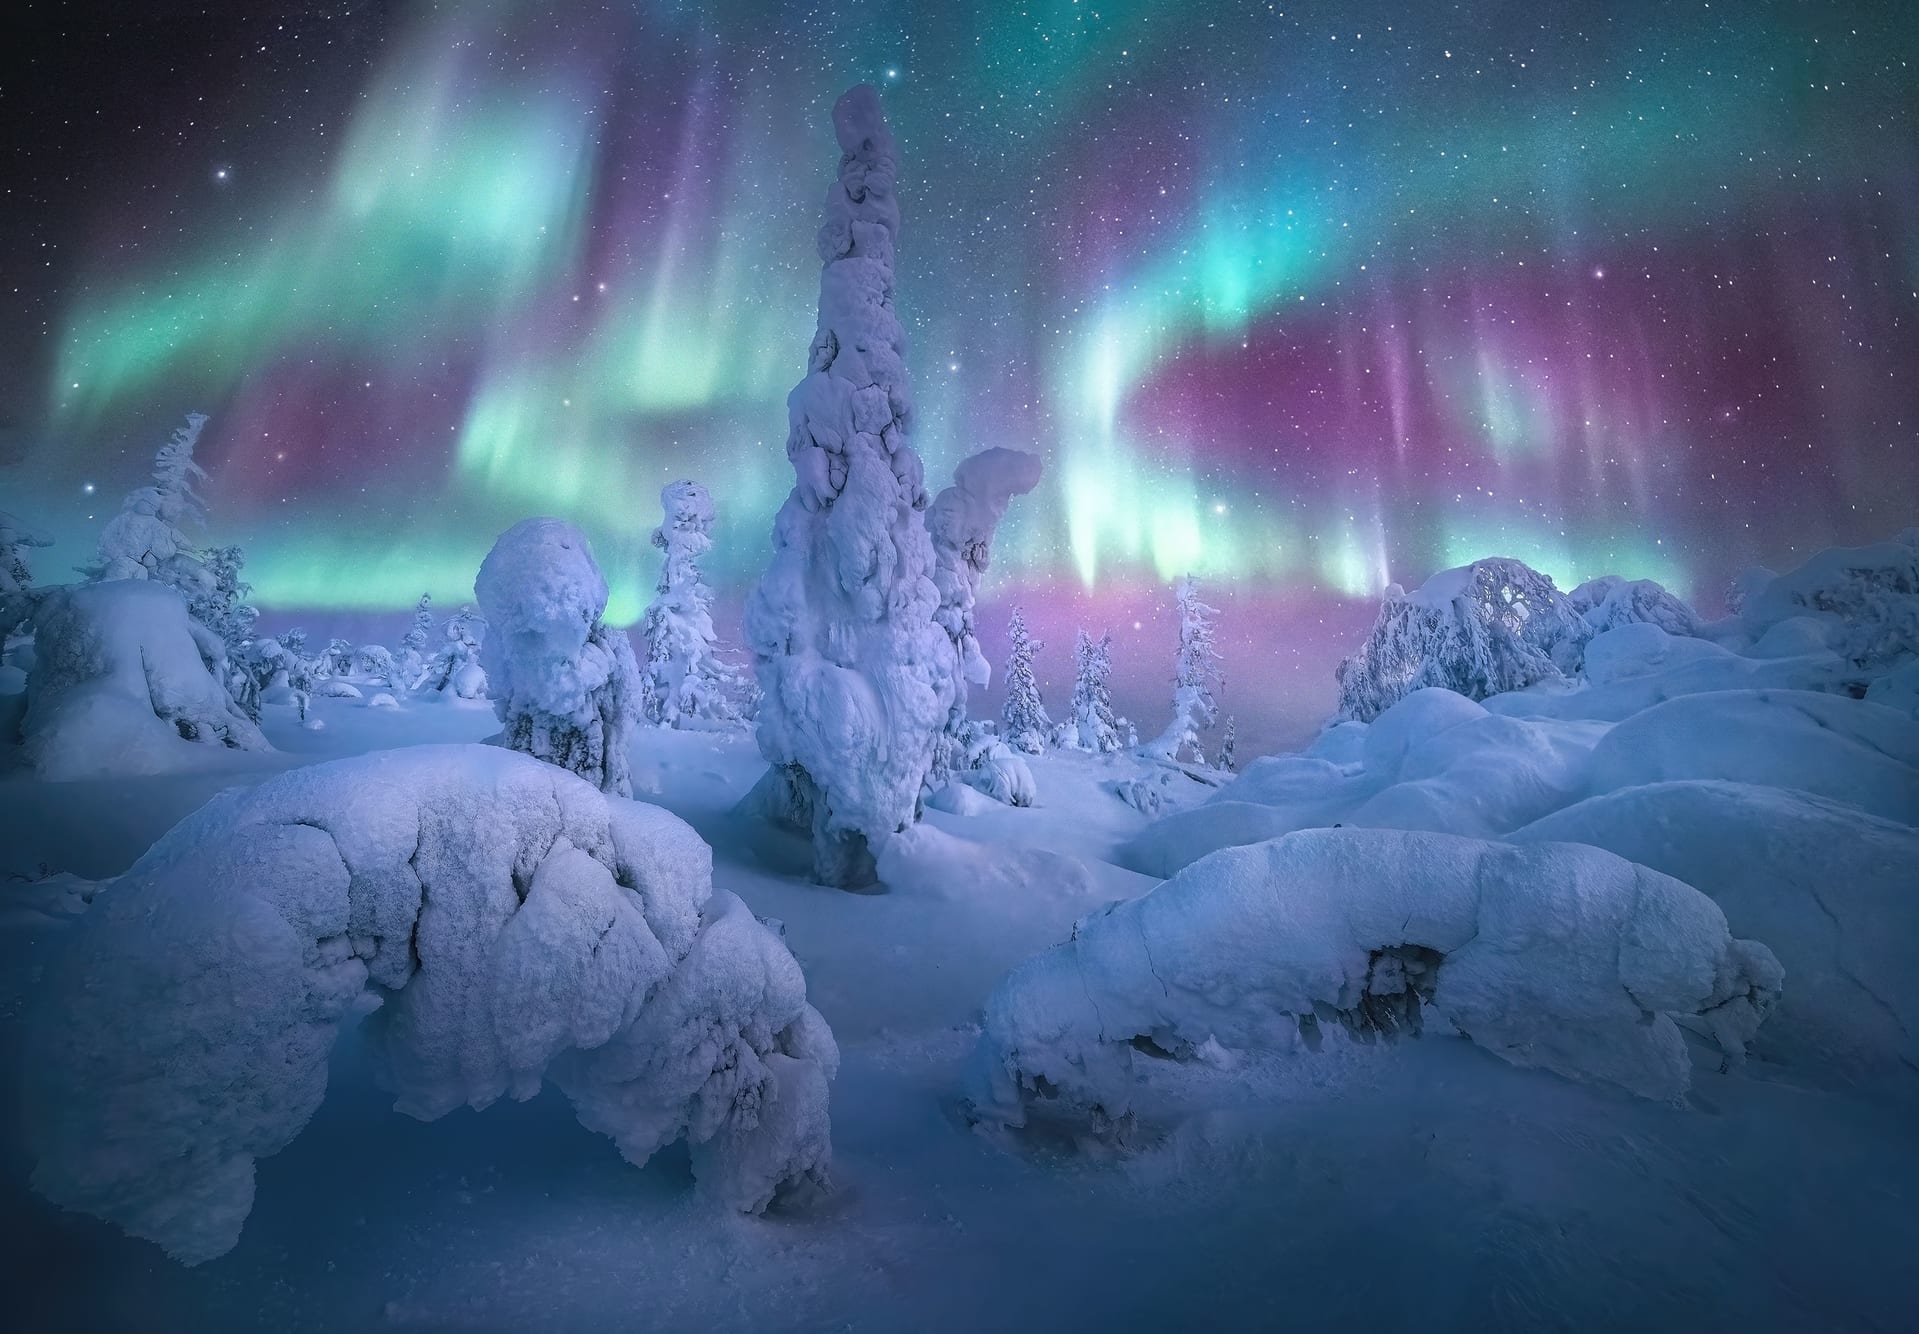 2022 Northern Lights photographer of the year